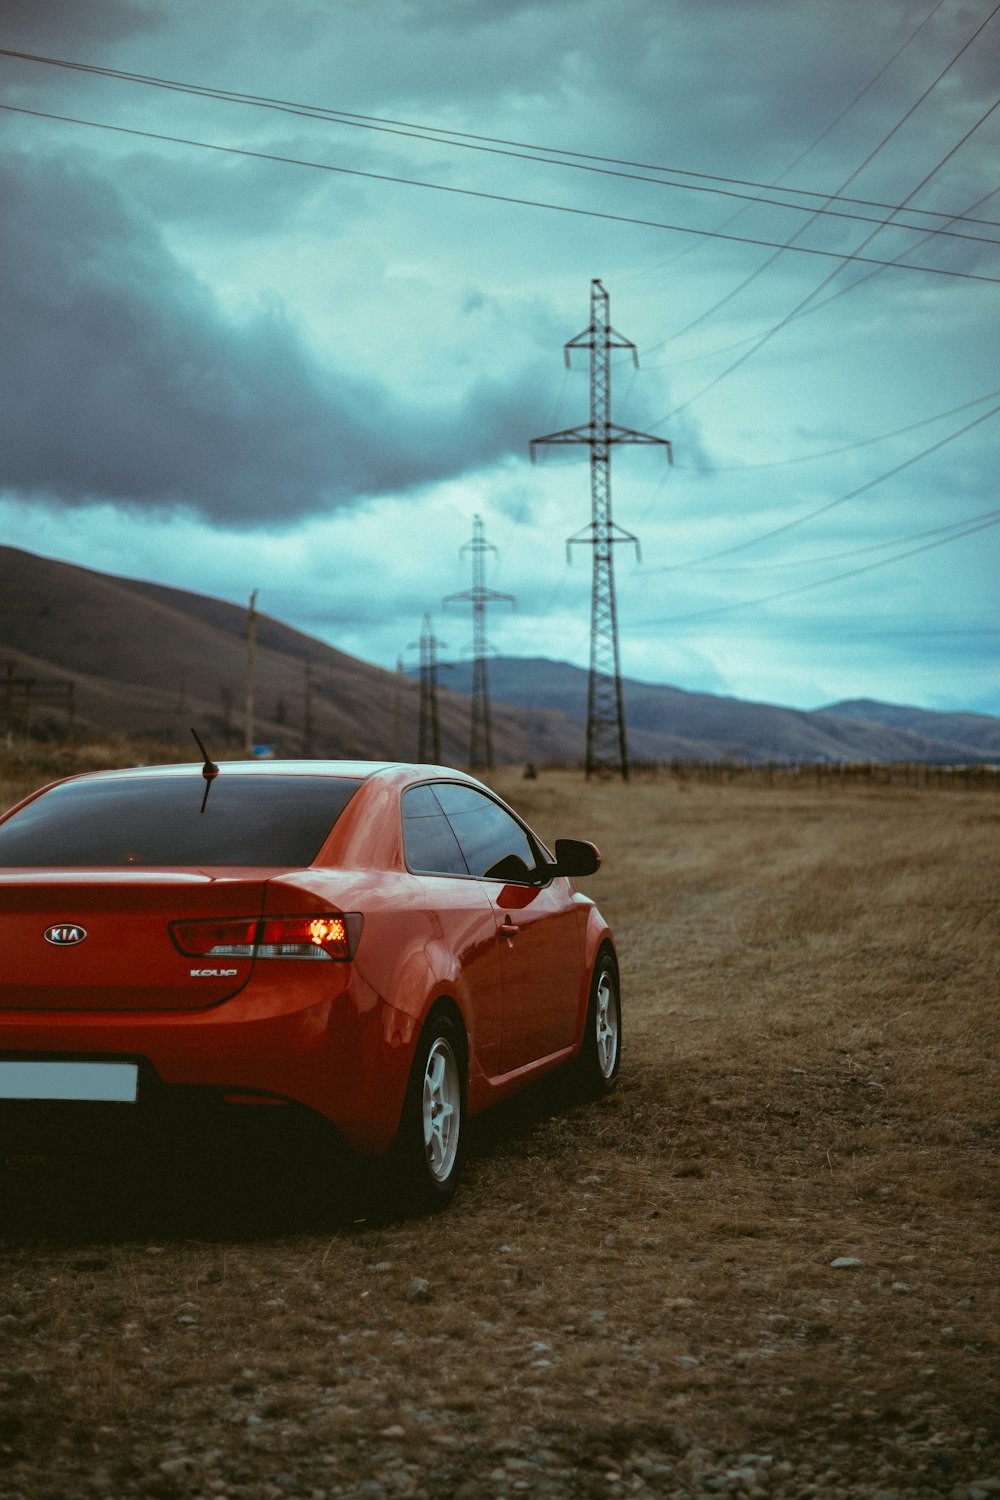 red Hyundai coupe near transmission tower